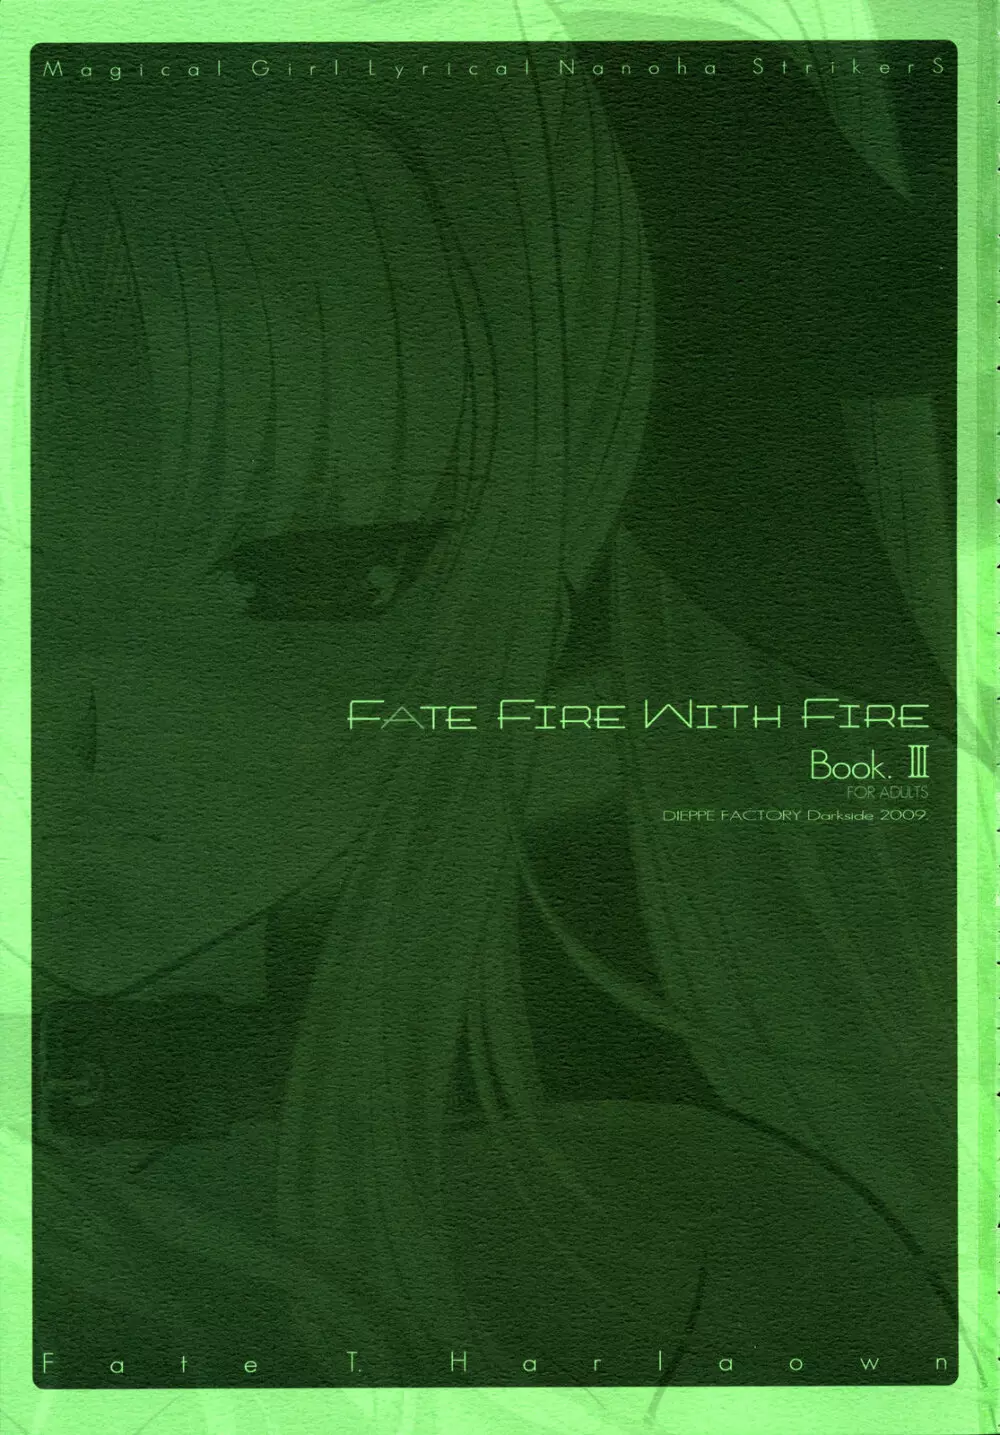 FATE FIRE WITH FIRE 3 3ページ